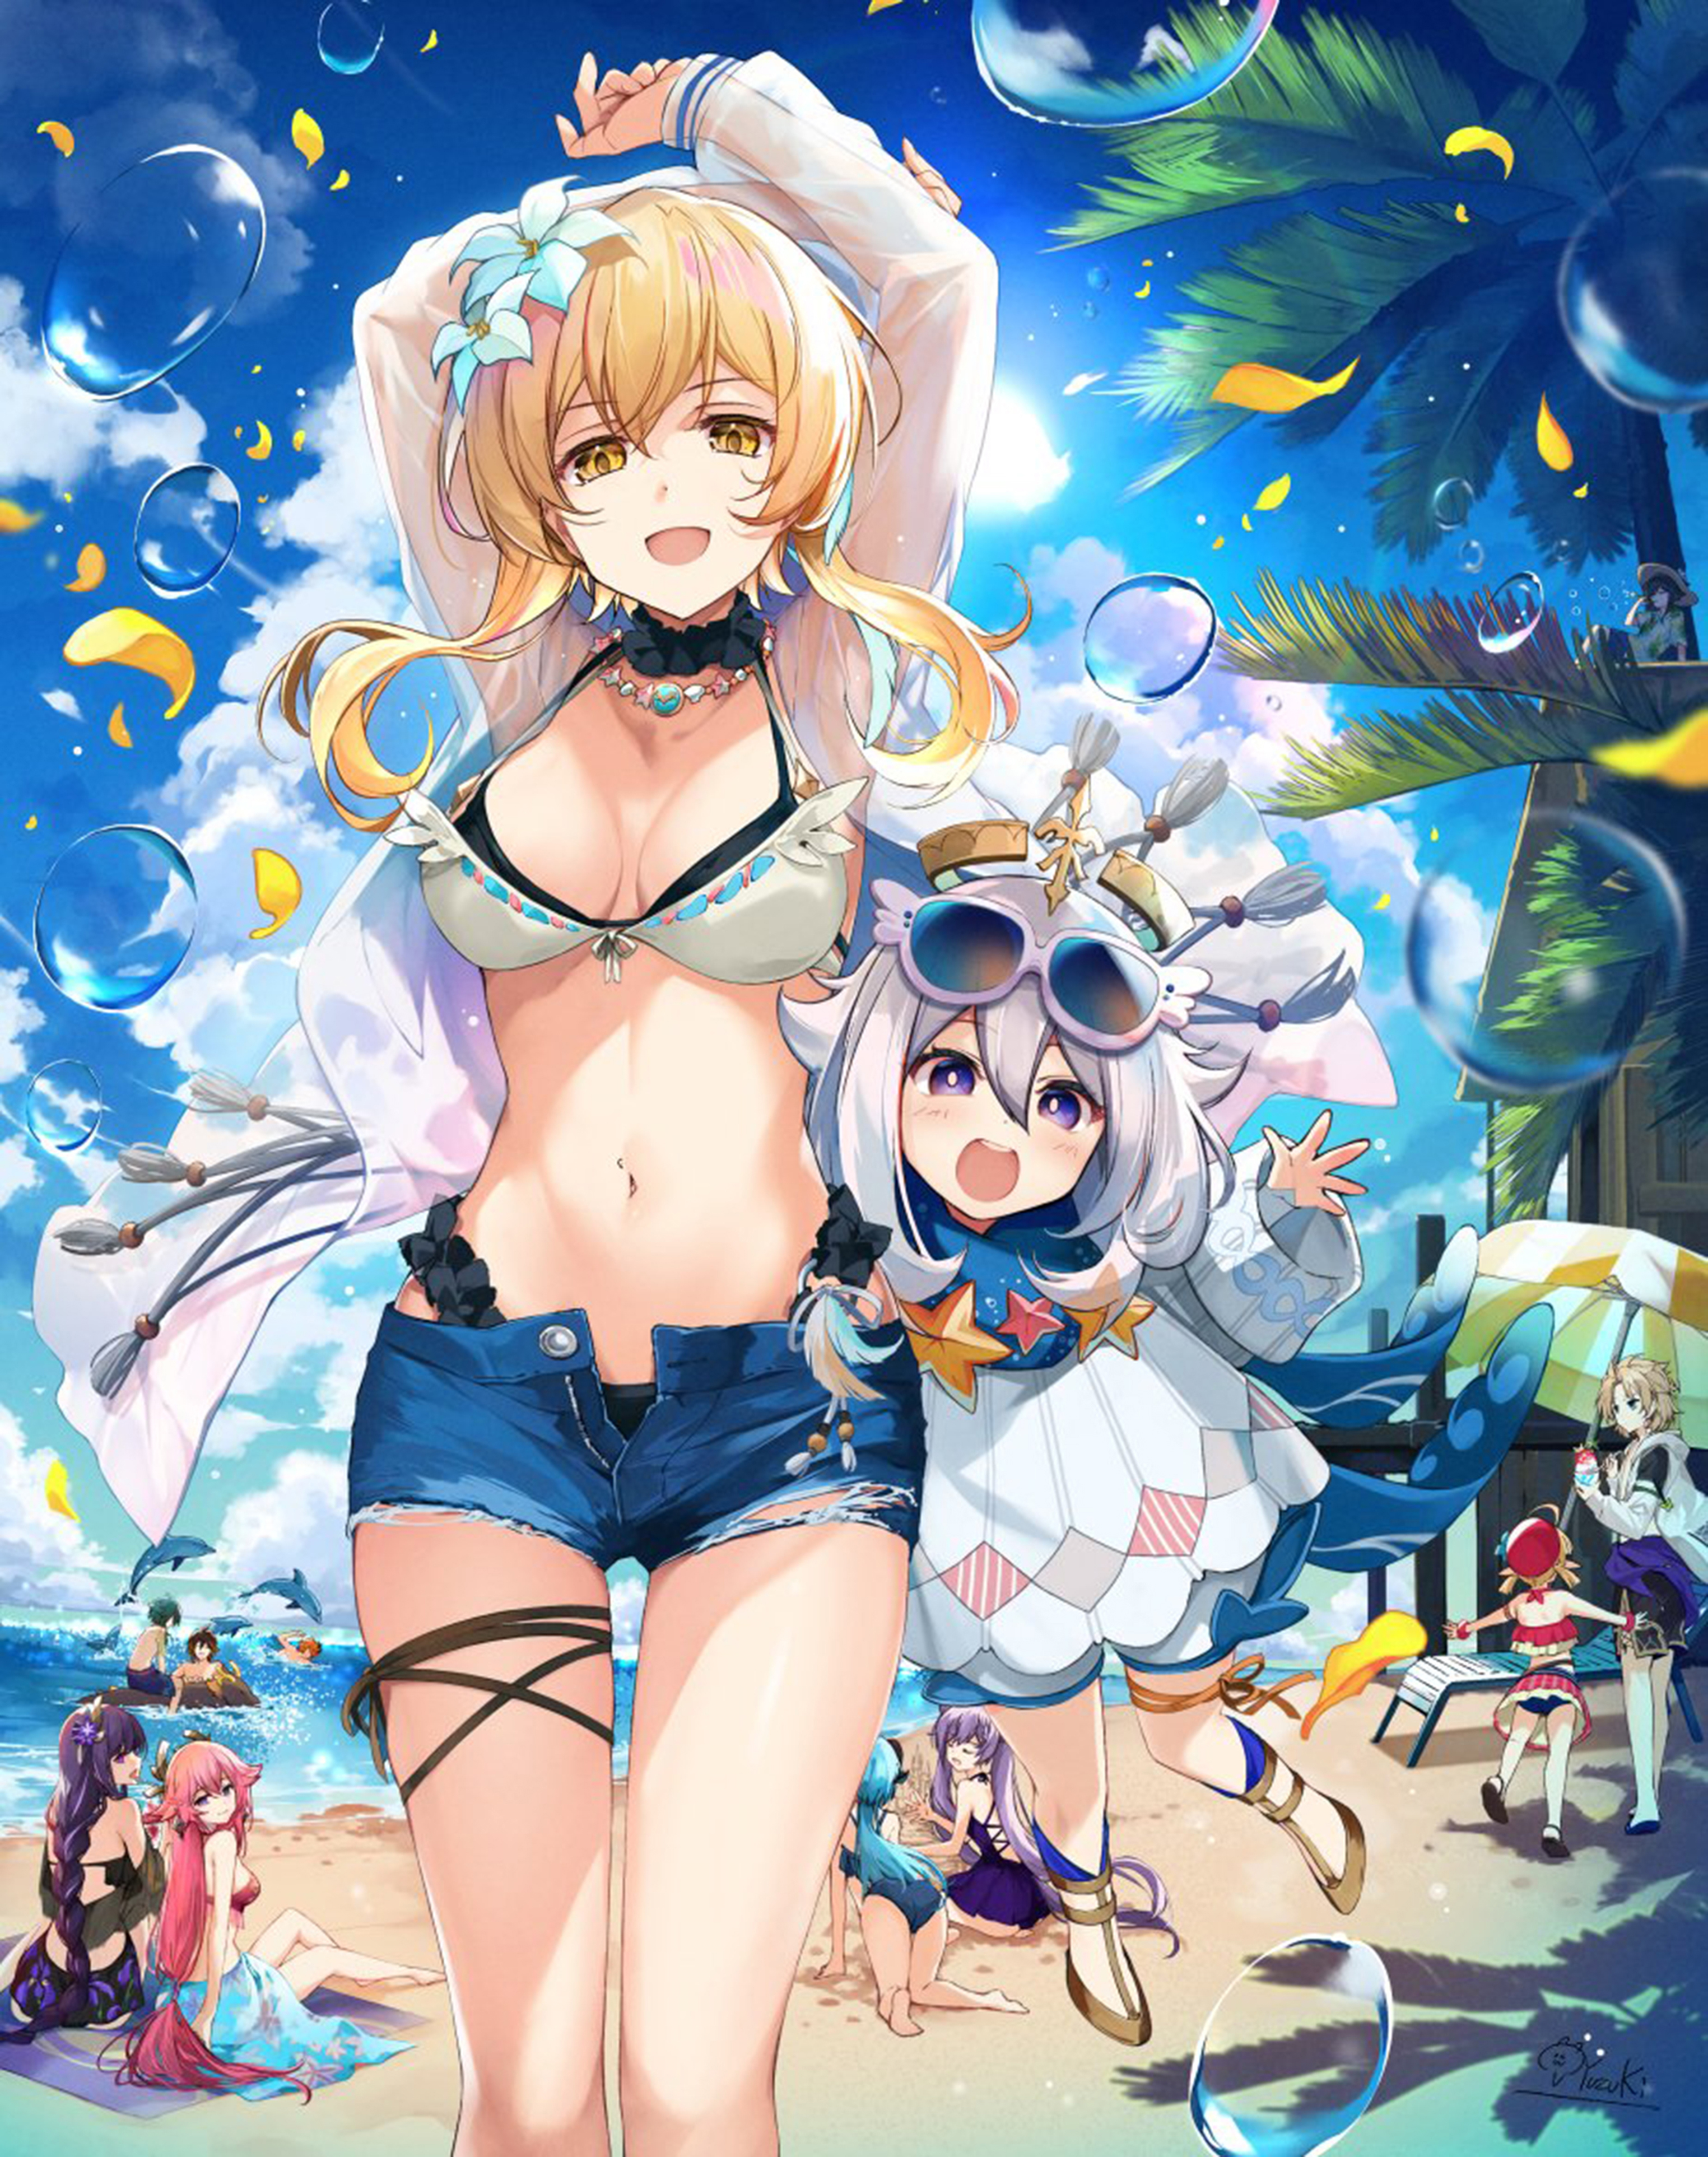 Anime 3049x3851 anime anime girls boobs bikini belly blonde flower in hair arms up yellow eyes unbuttoned jean shorts short shorts beach bubbles Genshin Impact Paimon (Genshin Impact) Lumine (Genshin Impact) Klee (Genshin Impact) Yae Miko (Genshin Impact) Raiden Shogun (Genshin Impact) Keqing (Genshin Impact) petals group of women women outdoors sunbed women on beach parasol palm trees open shorts open mouth cleavage looking at viewer clouds